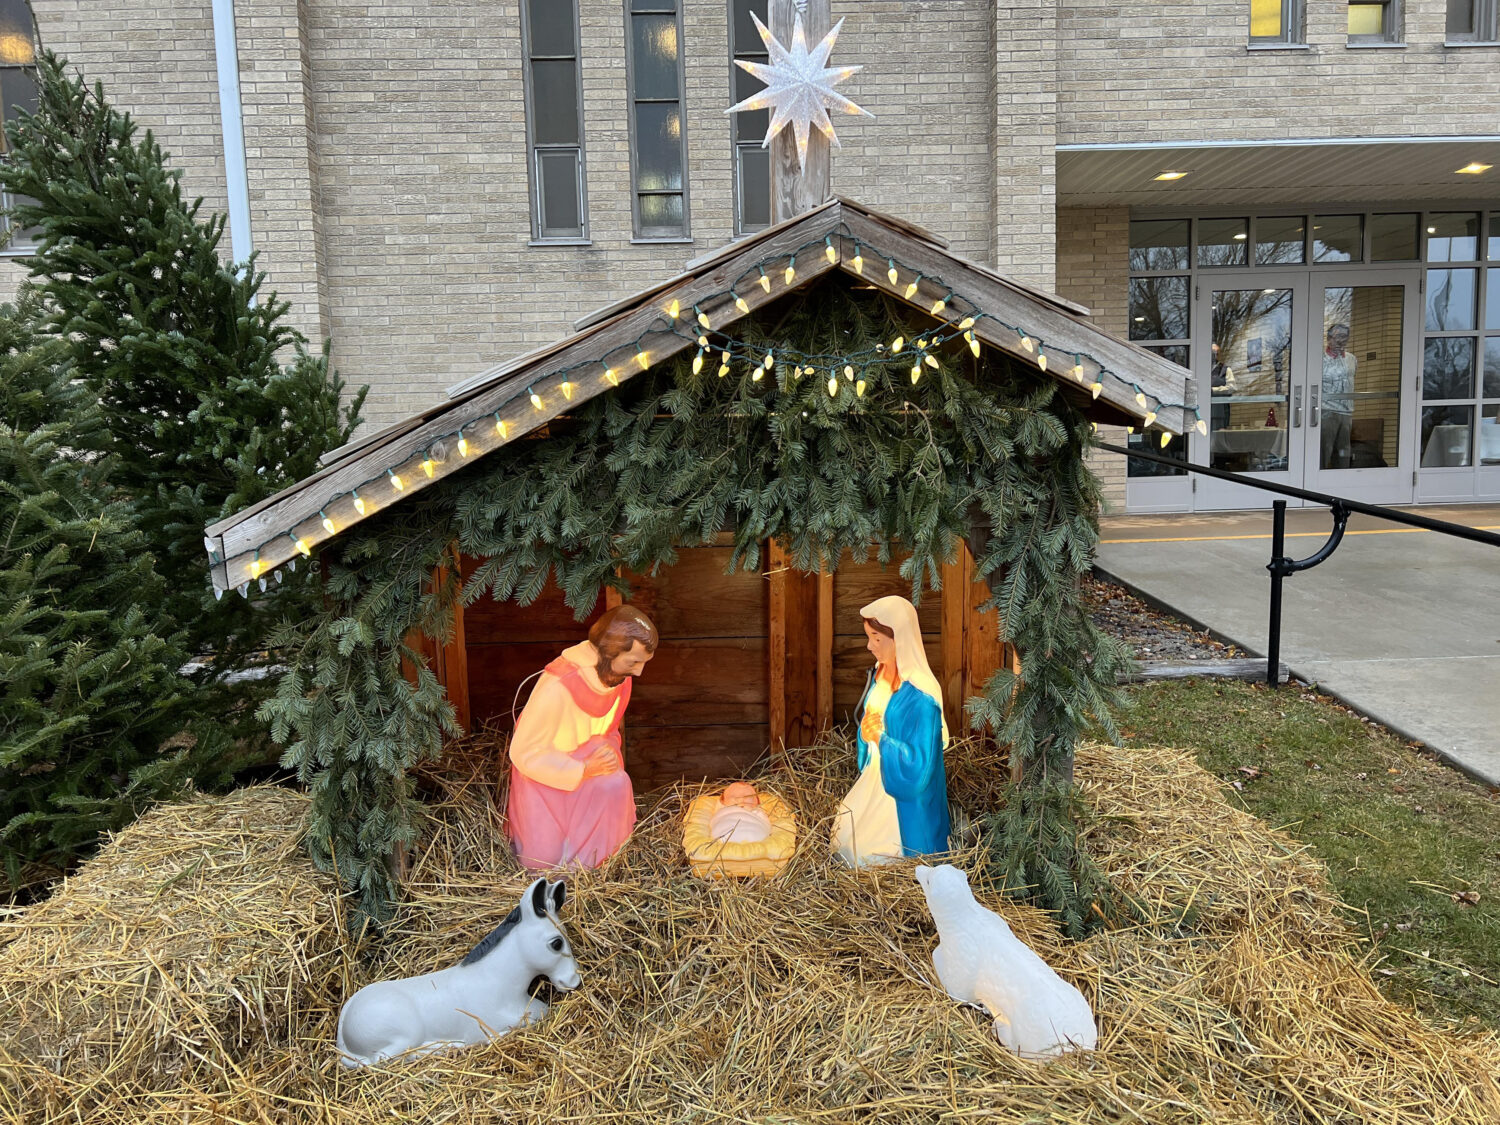 Nativities focus in churches and homes